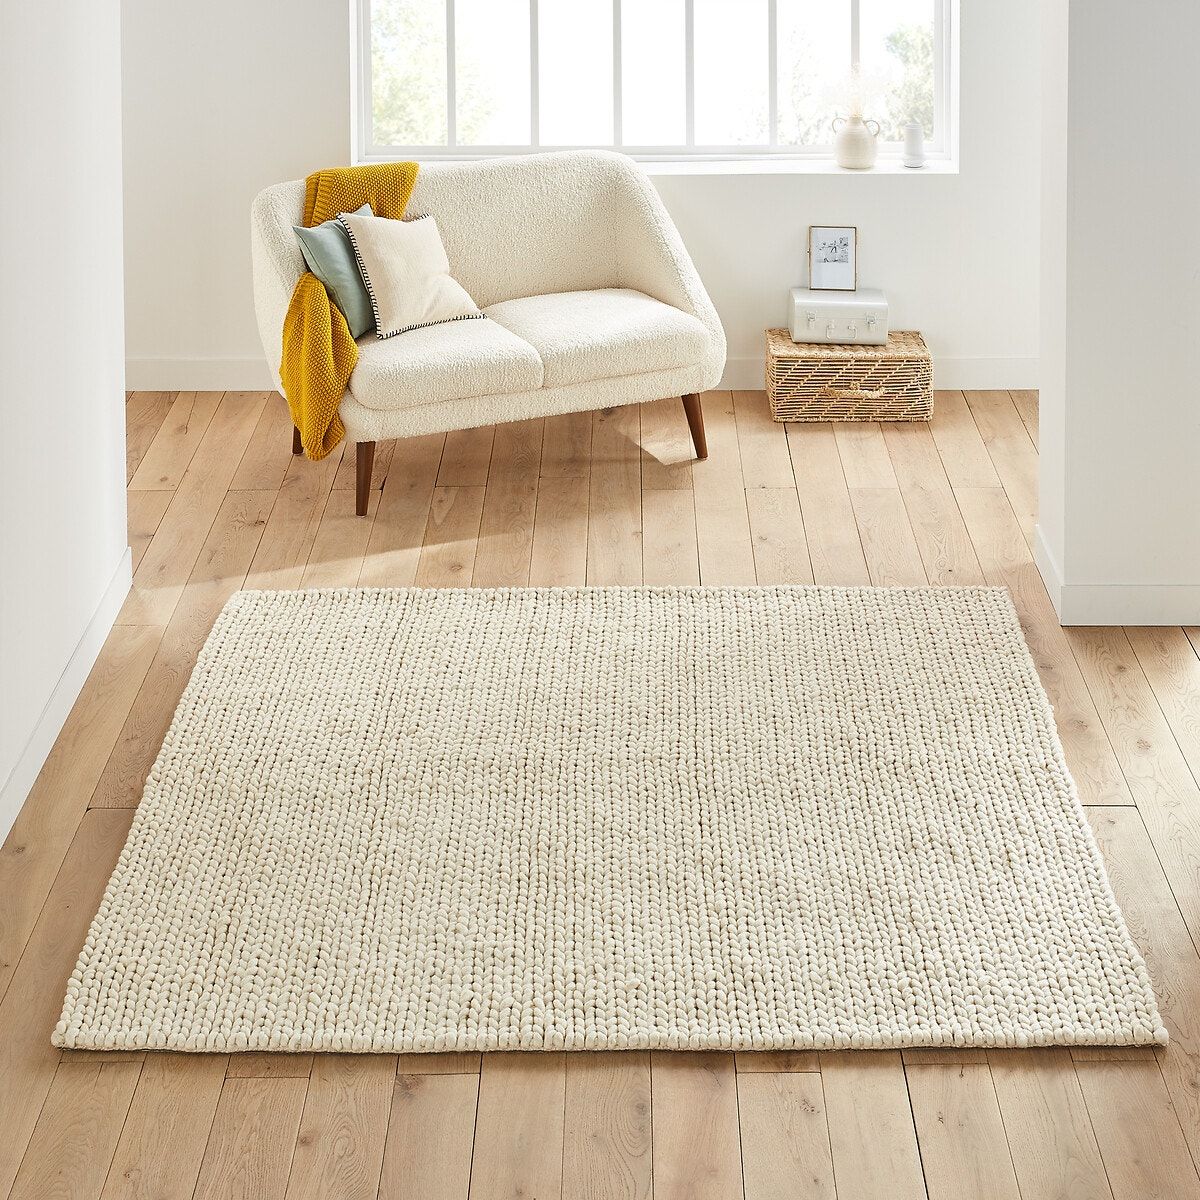 Diano Knit Effect Square 100% Wool Rug La Redoute Interieurs | La Redoute Within Square Rugs (View 3 of 15)